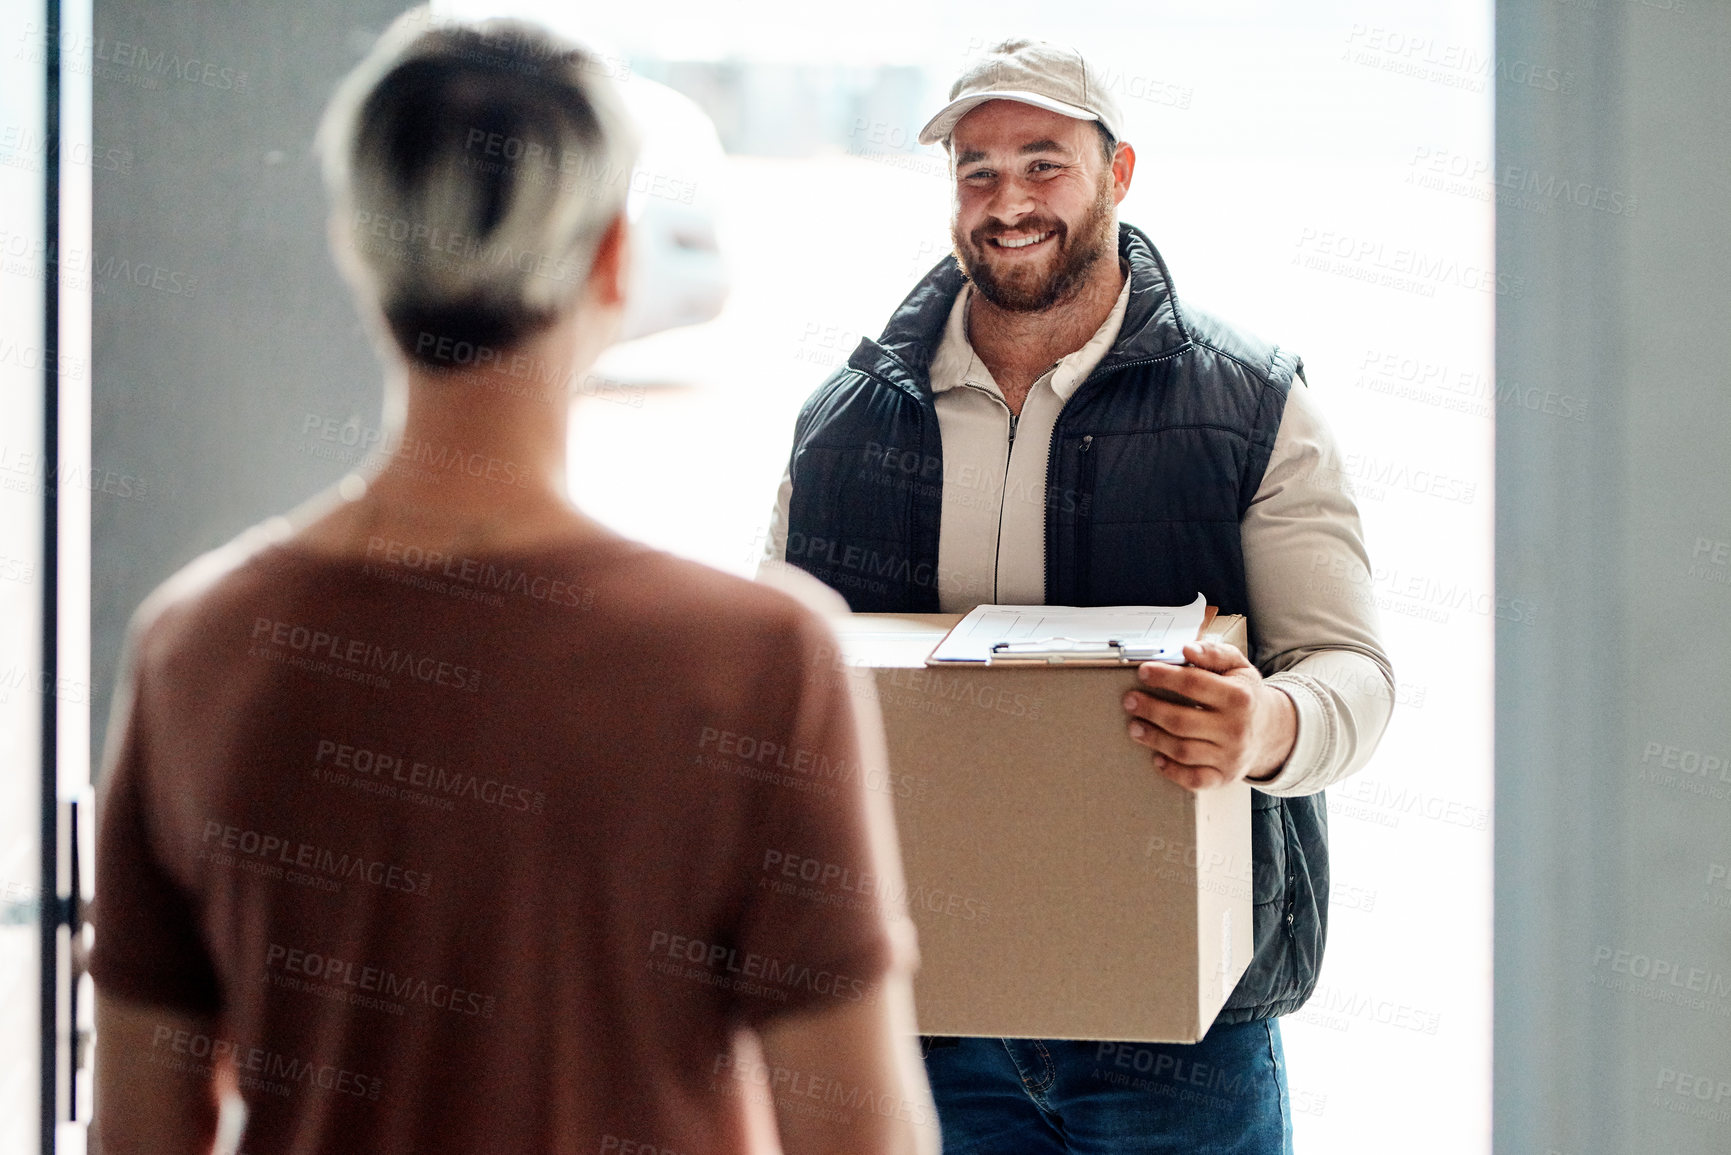 Buy stock photo Shot of a courier making a delivery to a customer at her home